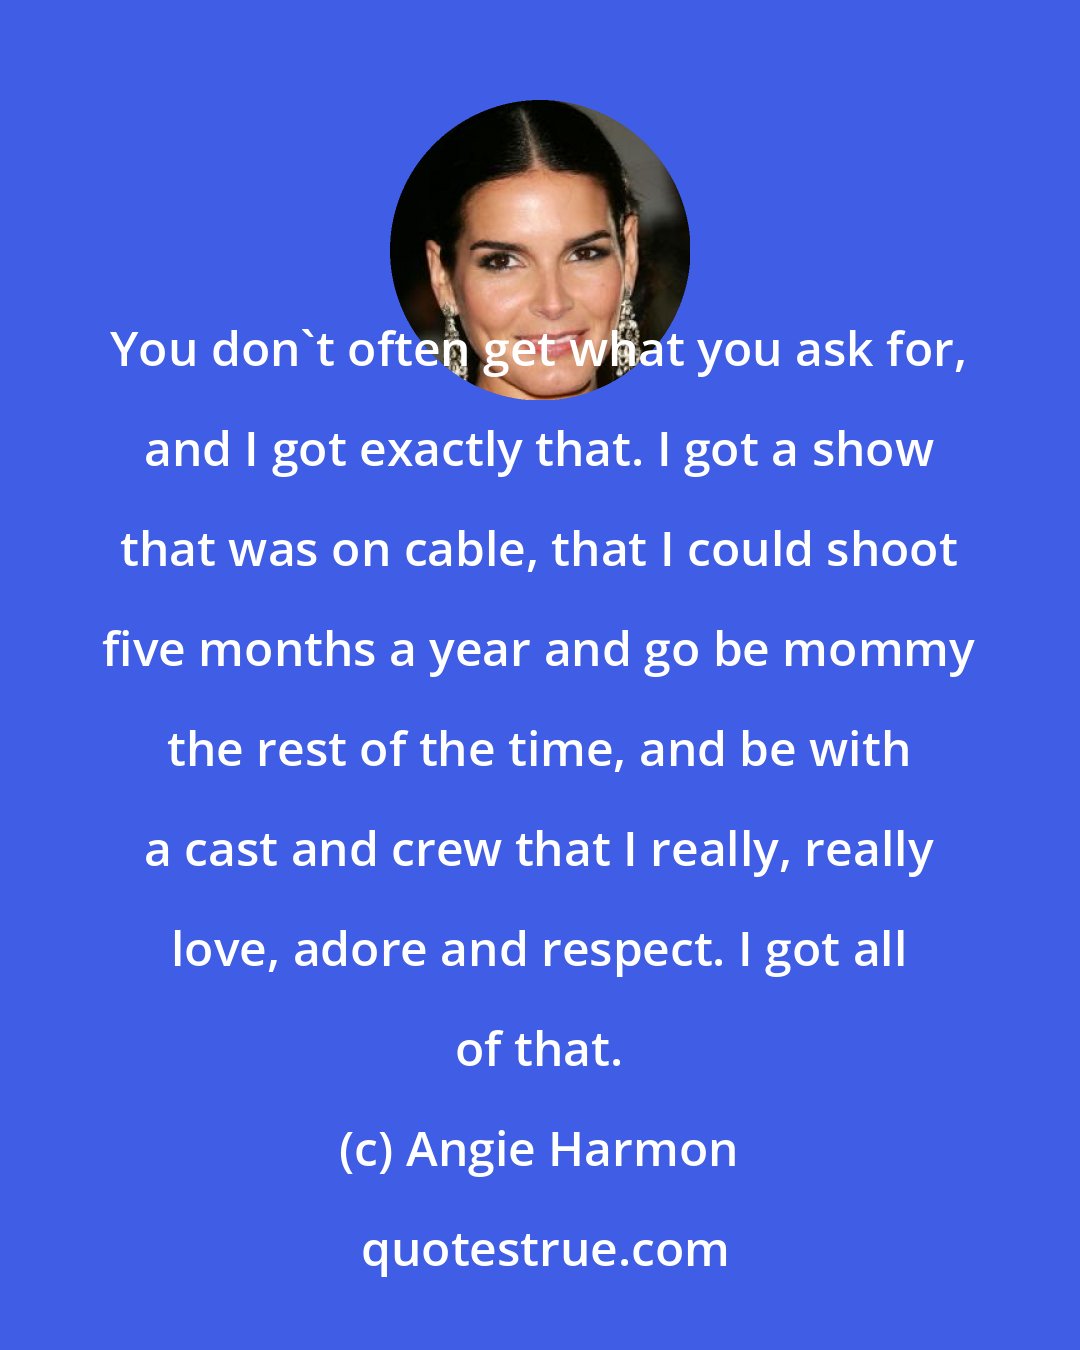 Angie Harmon: You don't often get what you ask for, and I got exactly that. I got a show that was on cable, that I could shoot five months a year and go be mommy the rest of the time, and be with a cast and crew that I really, really love, adore and respect. I got all of that.